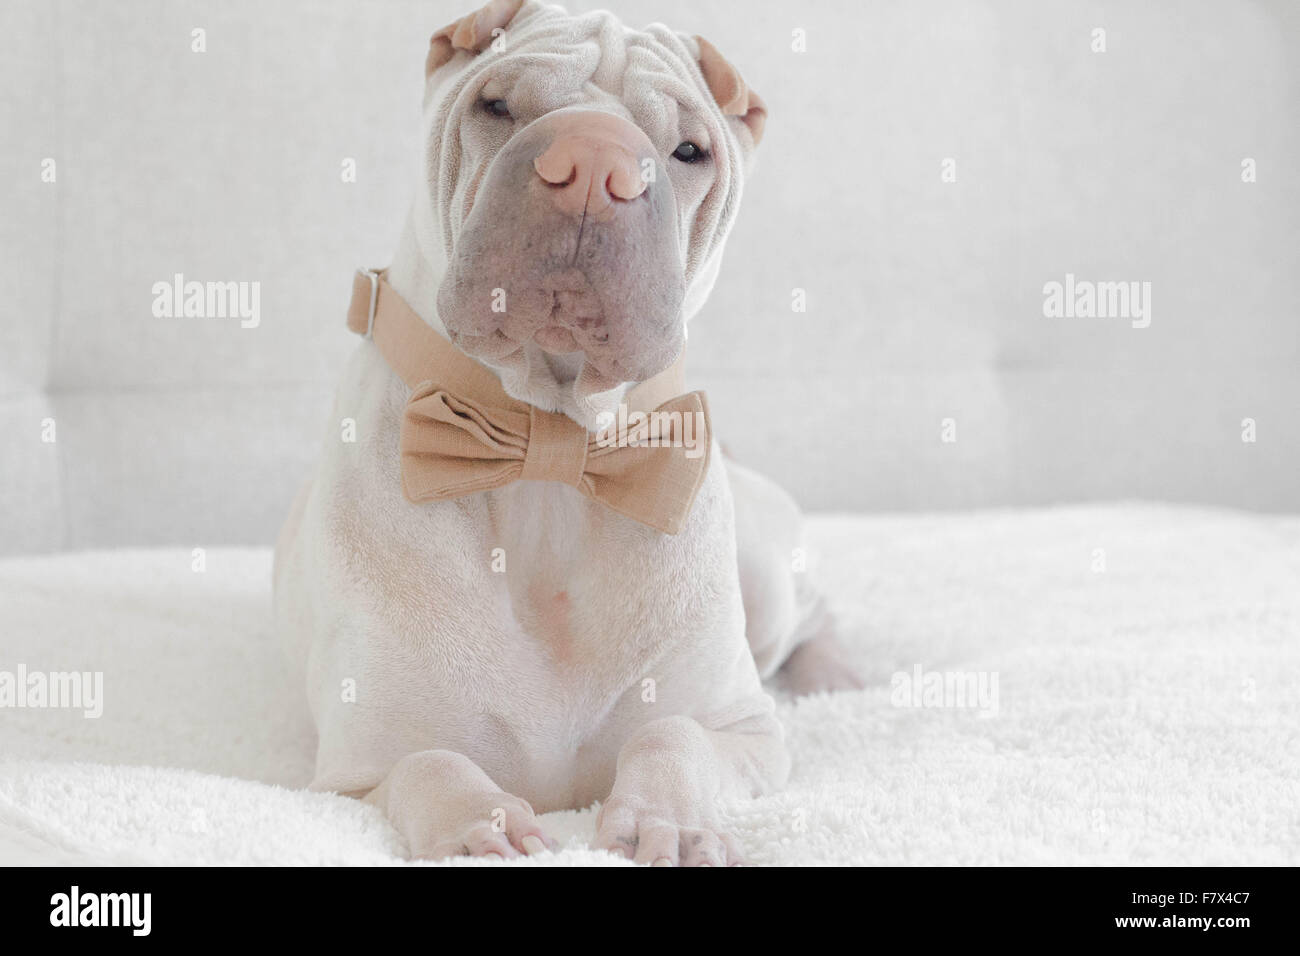 Shar Pei dog wearing a bow-tie Stock Photo